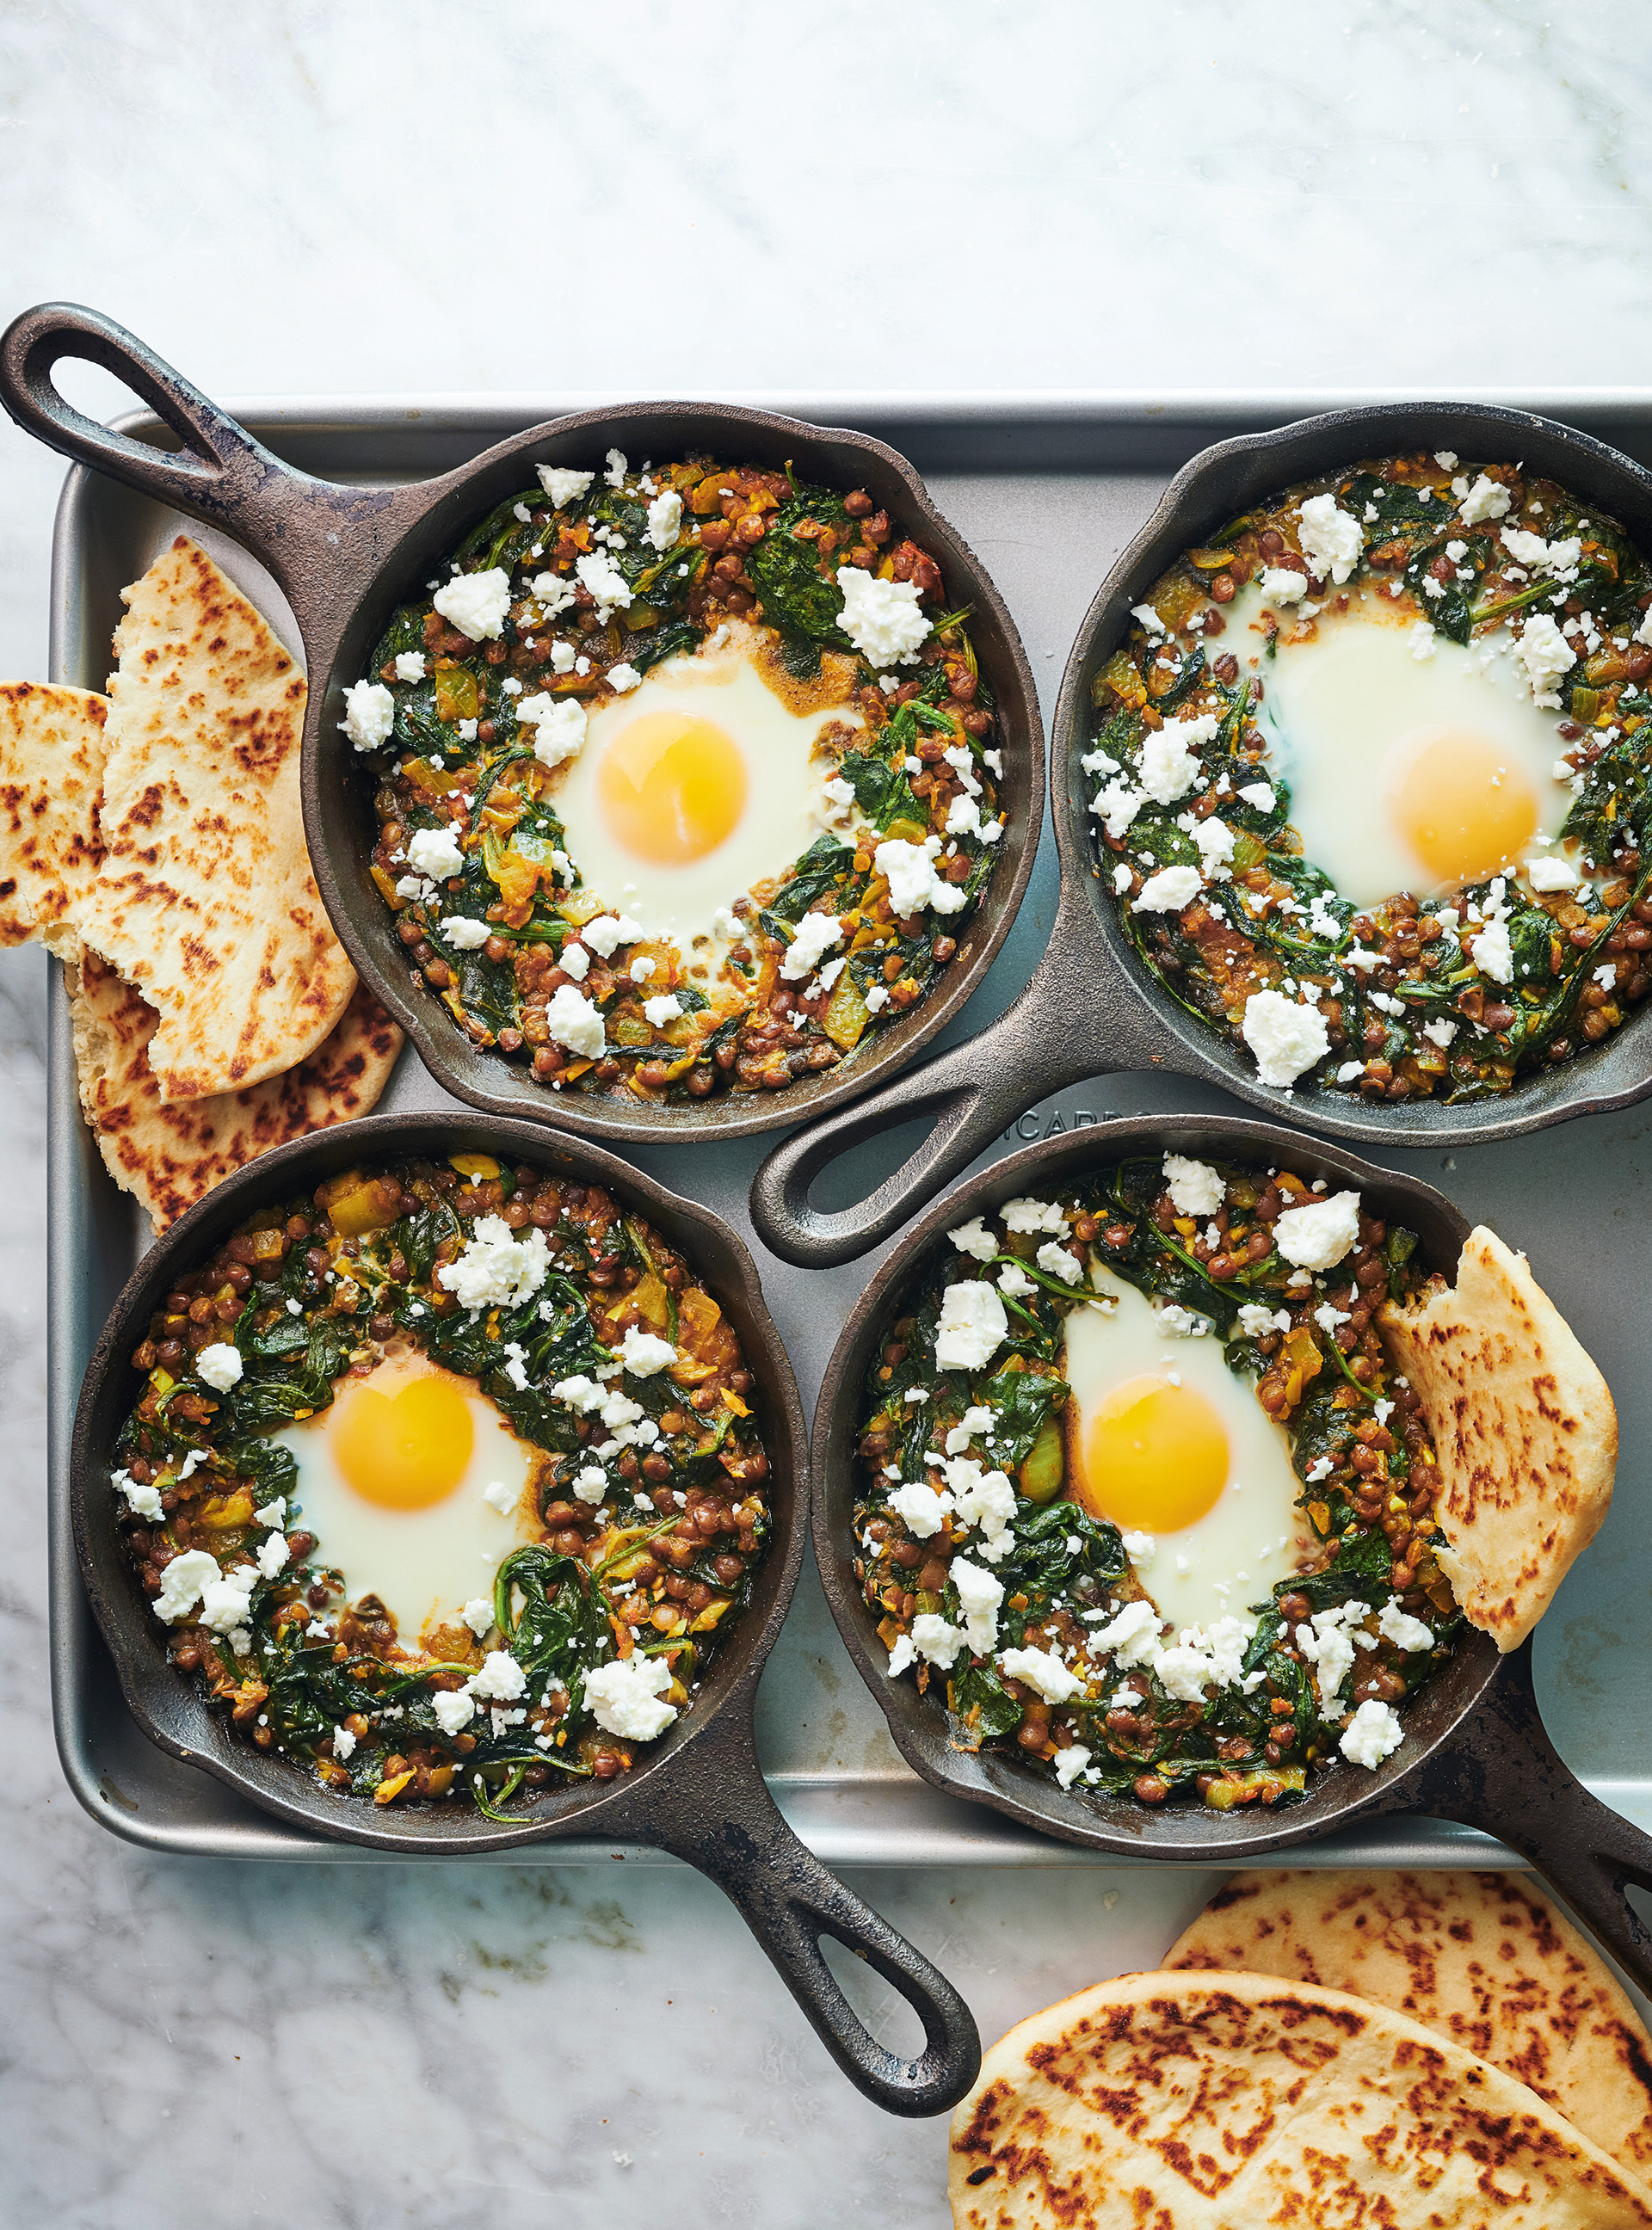 Poached Eggs with Spinach and Lentils